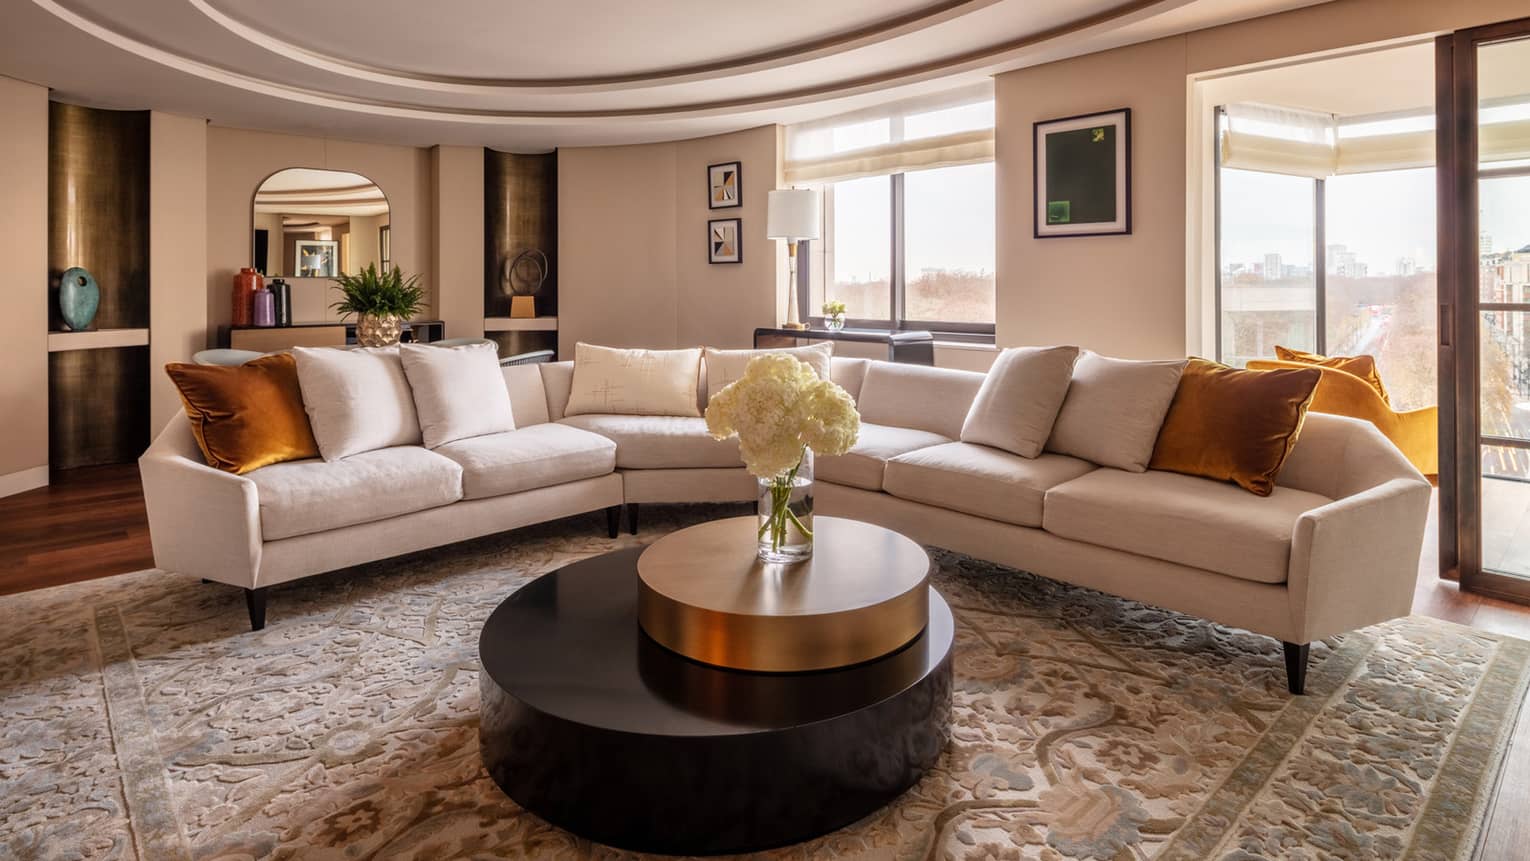 The Hyde Park Suite at Four Seasons London Park Lane in Mayfair showcases a sophisticated living room with a panoramic view of the city. The room features a long, sleek white sofas with orange throw pillows, arranged around a large circular black coffee table with a gold rim. The area is adorned with a luxurious beige patterned rug, adding texture and warmth. Artworks hang on the walls, and a large window frames the stunning view outside, providing ample natural light. The decor is elegantly completed with a neutral colour palette and modern furnishings, creating an inviting and stylish space.